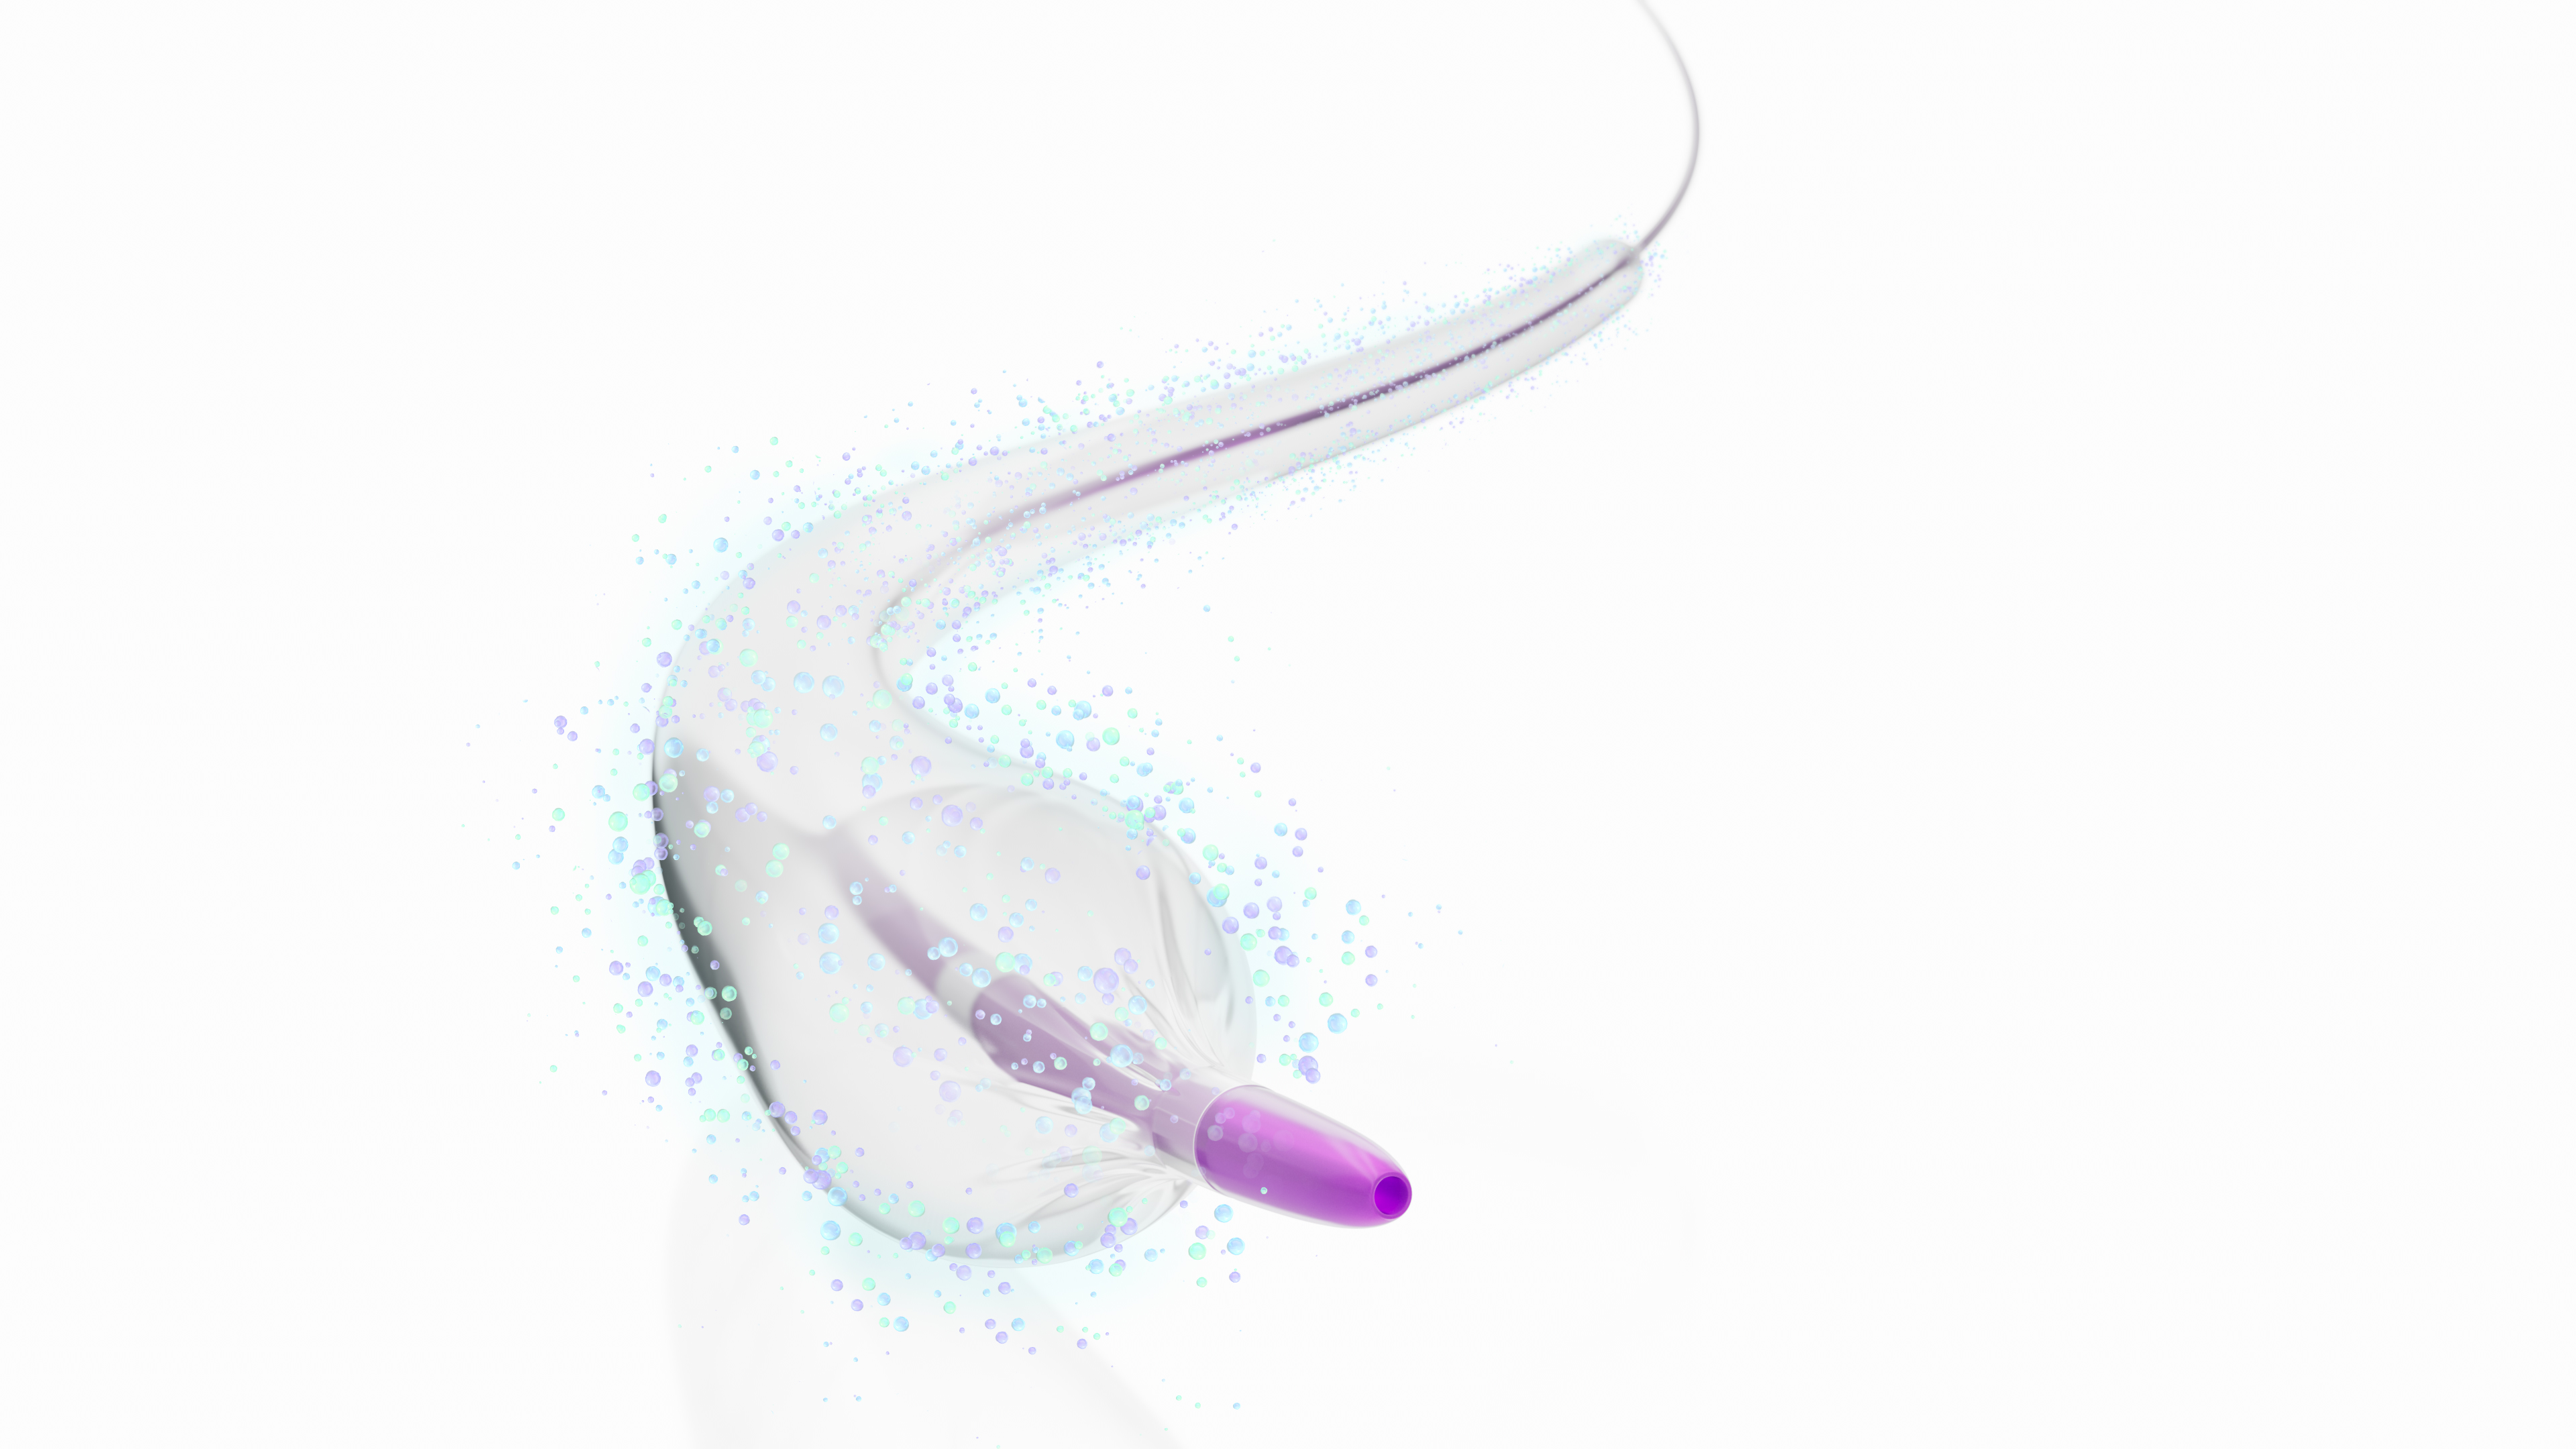 Doodskaak Peave zelfmoord Medtronic's In.Pact 018 Drug-Coated Balloon Receives FDA Approval for PAD -  Endovascular Today